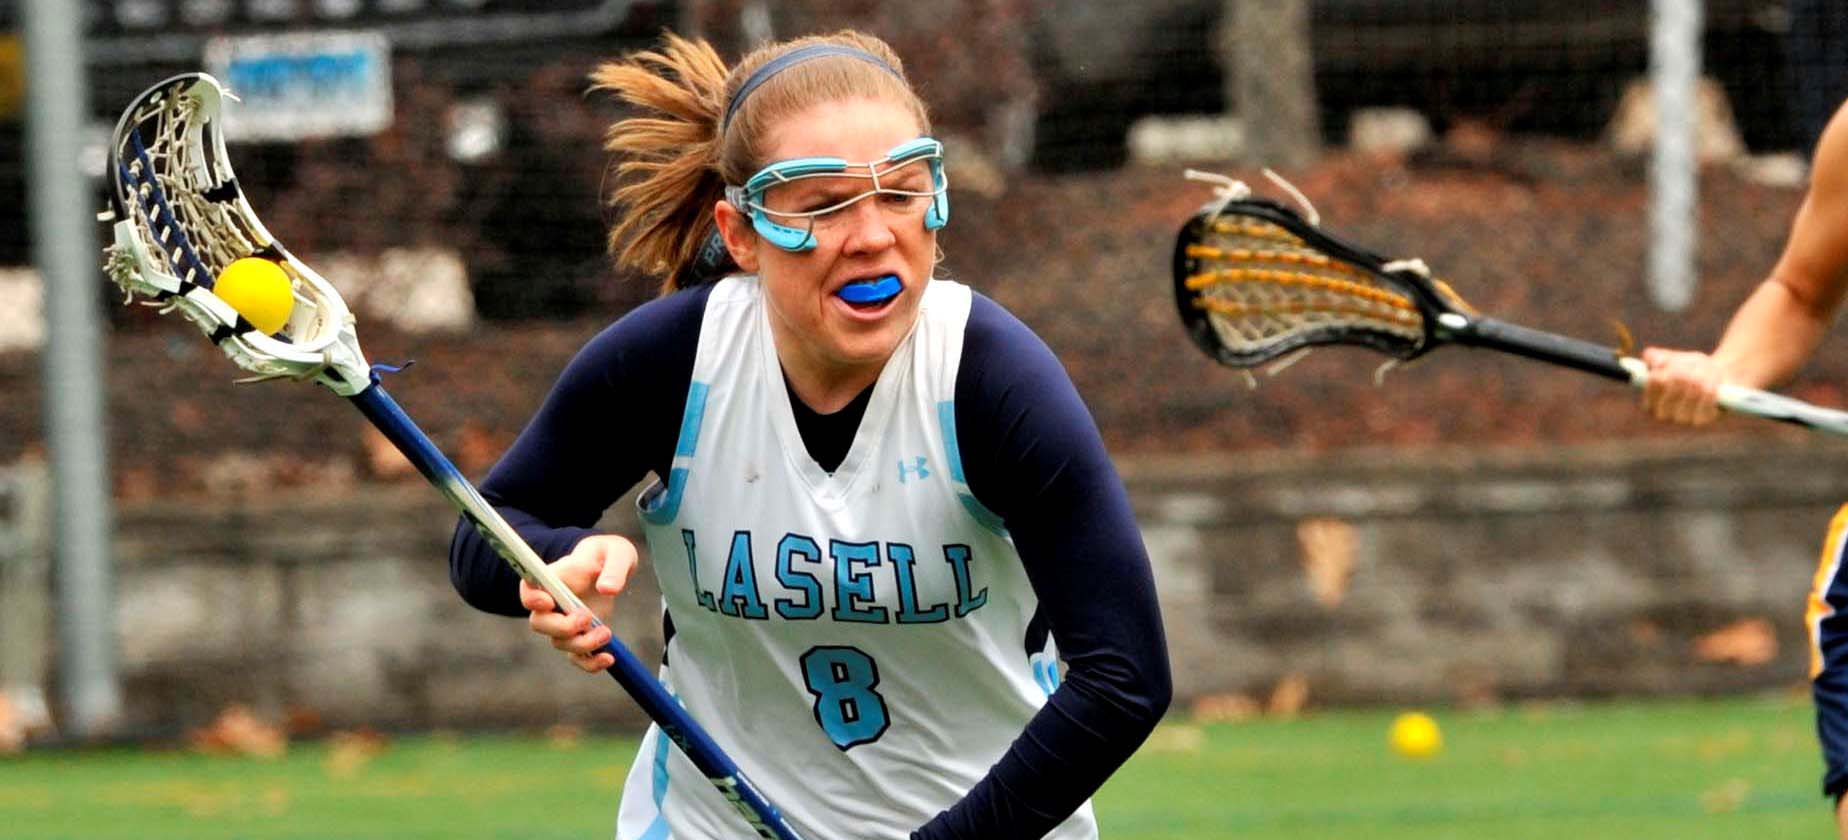 Hot First Half Sends Emerson Over Women's Lacrosse 11-6